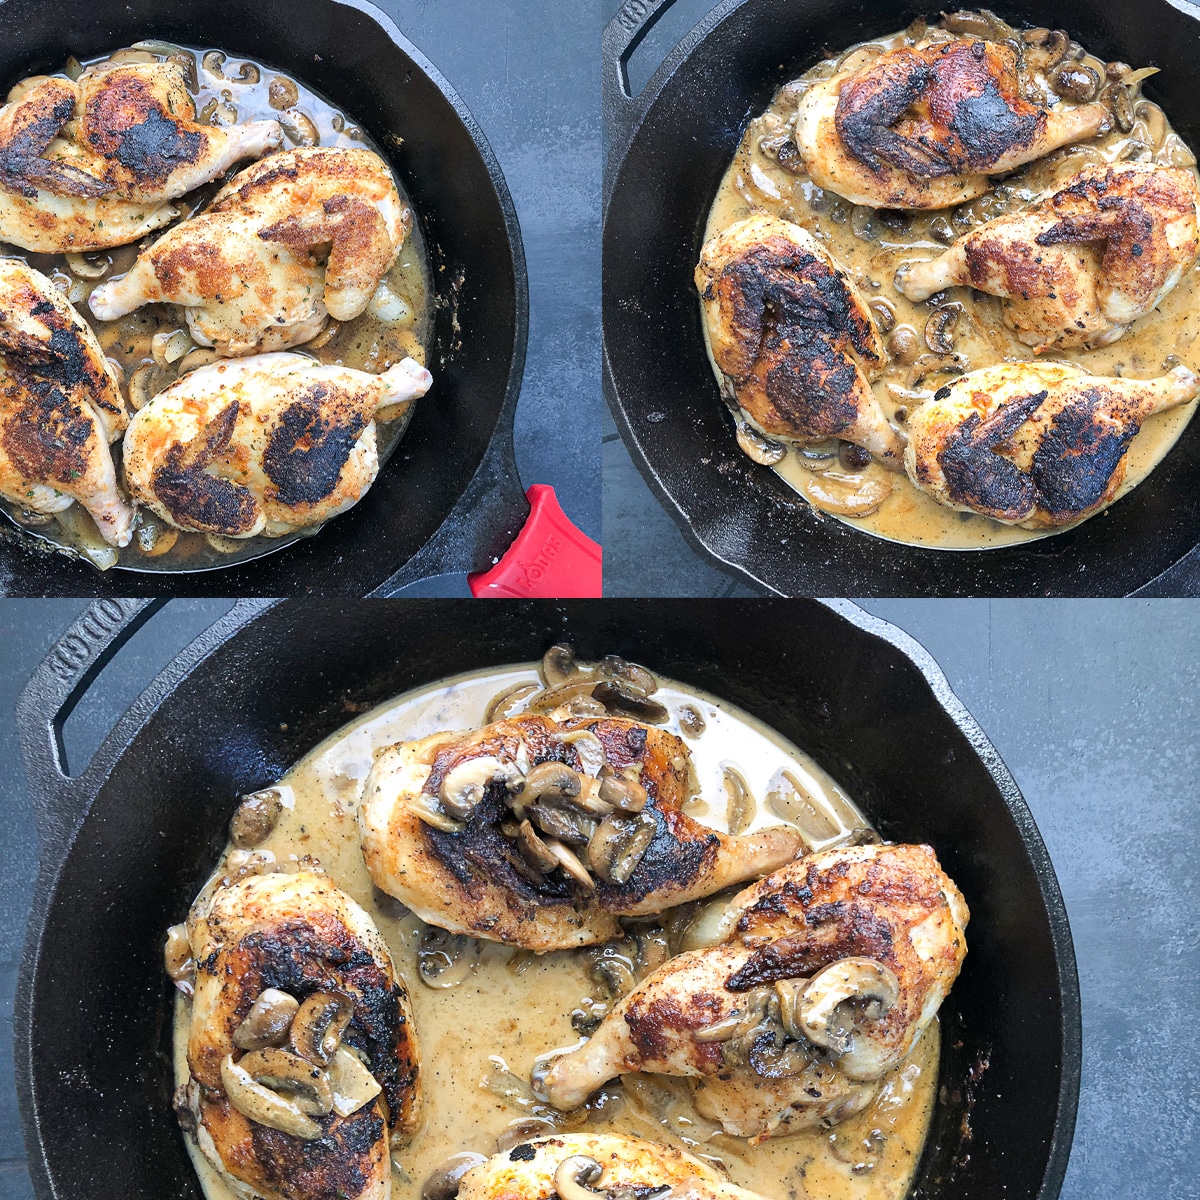 Step by steps photos on how to make cornish hen steps 5-7